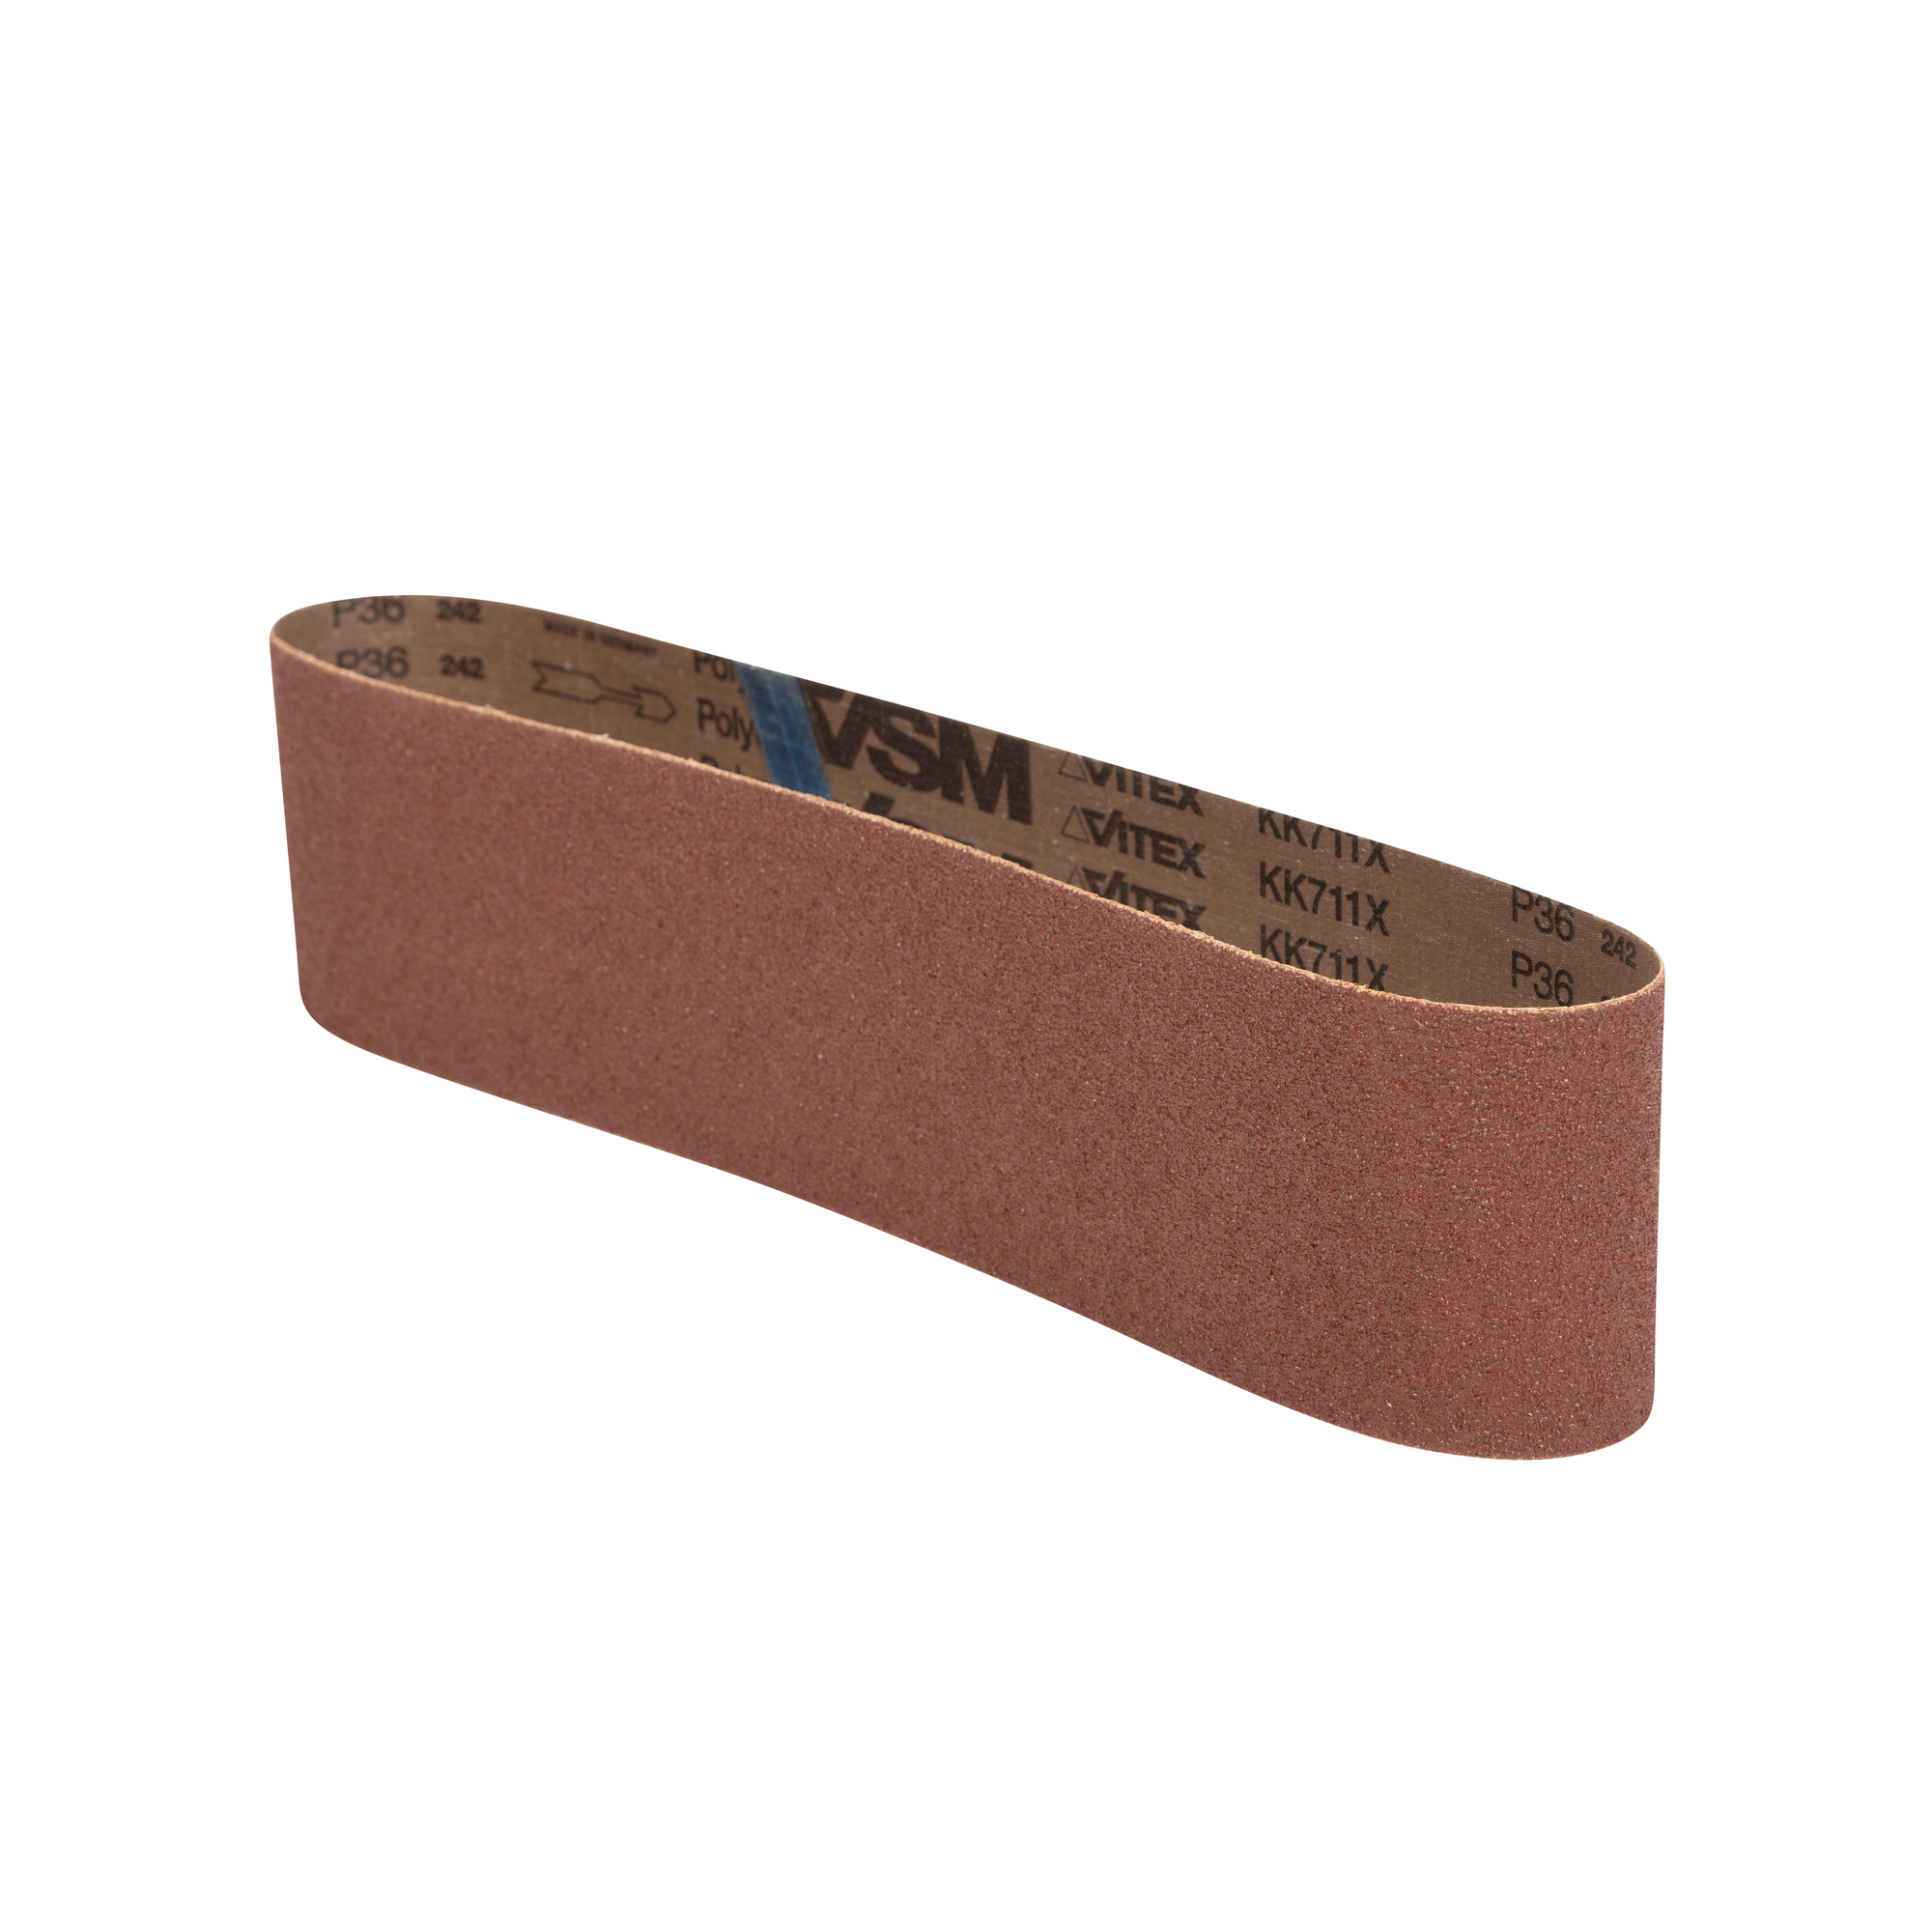 JET, Sand Paper, Pieces (qty.) 3 Grit 80 Length 36 in, Model 577537